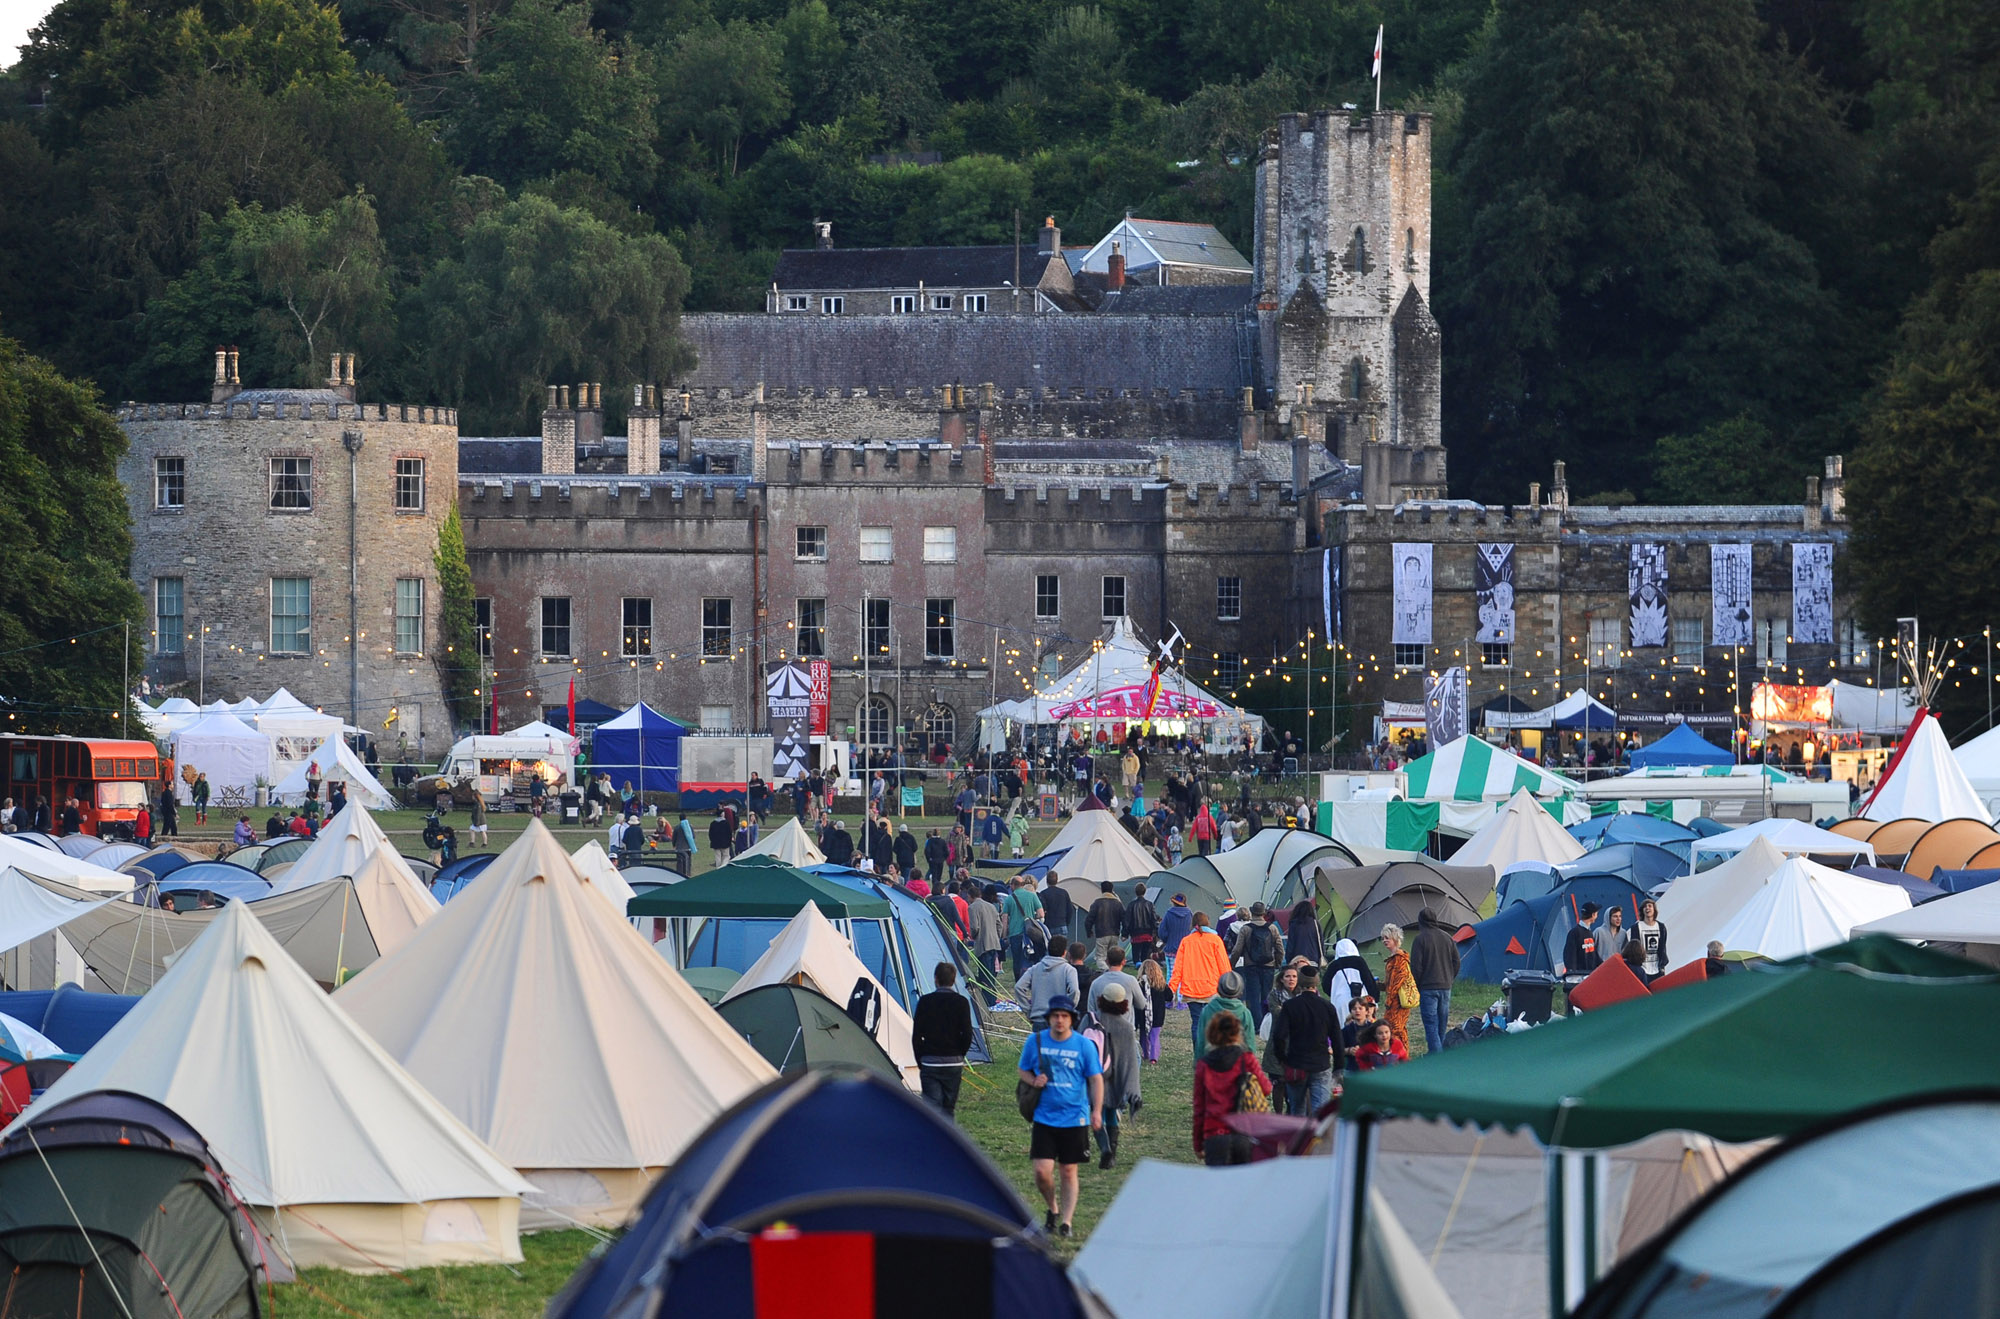 This year's Port Eliot Festival will be last 'for the foreseeable